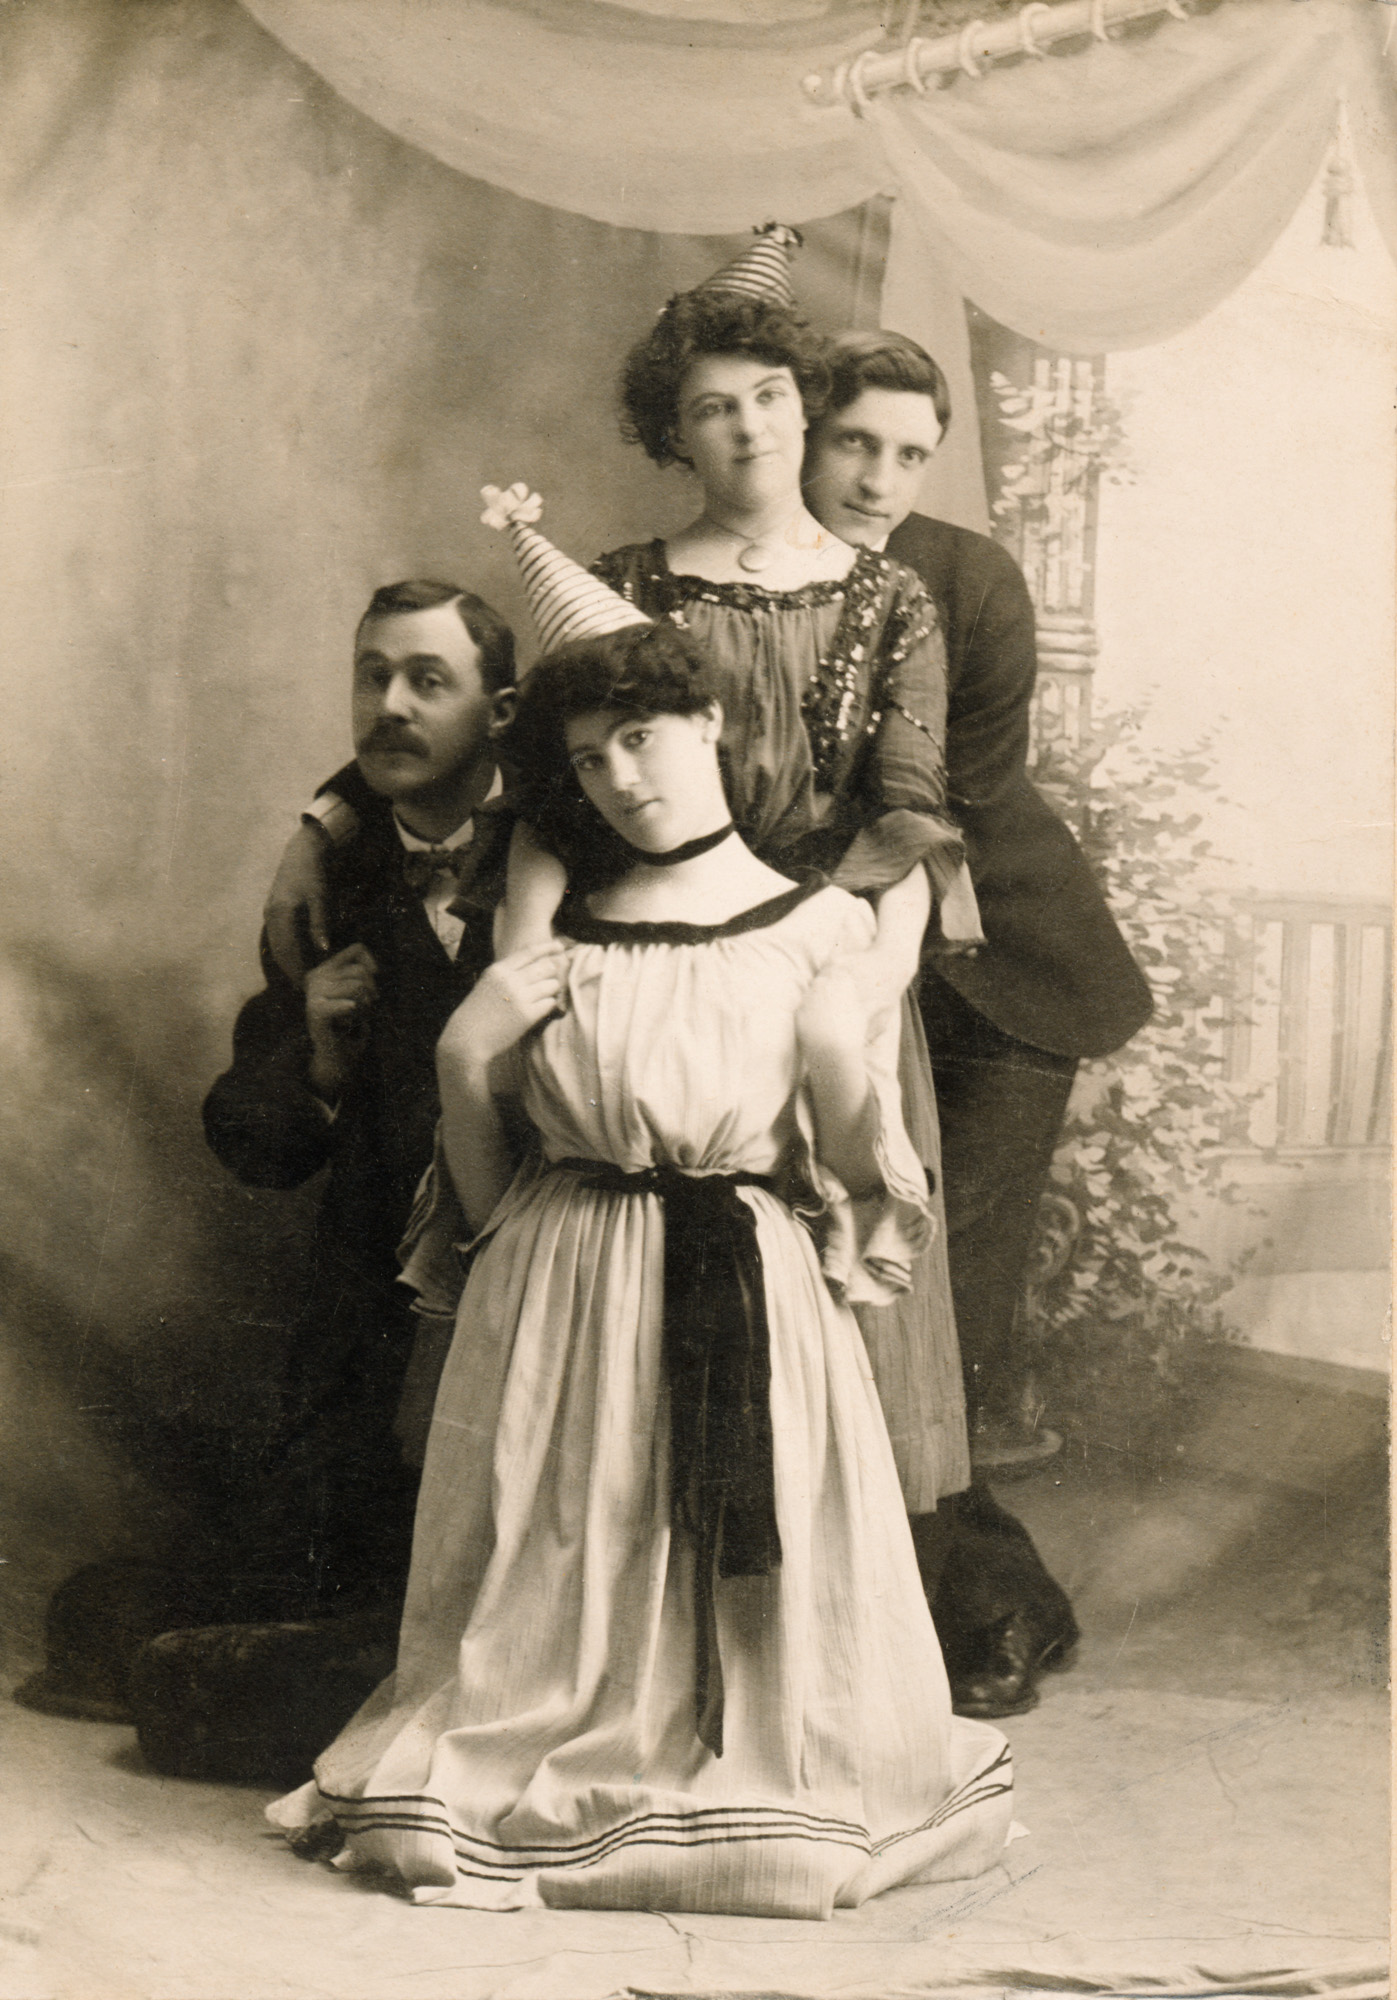 Dauth Family Archive - Florence Yeaton Valentines Day Photoshoot